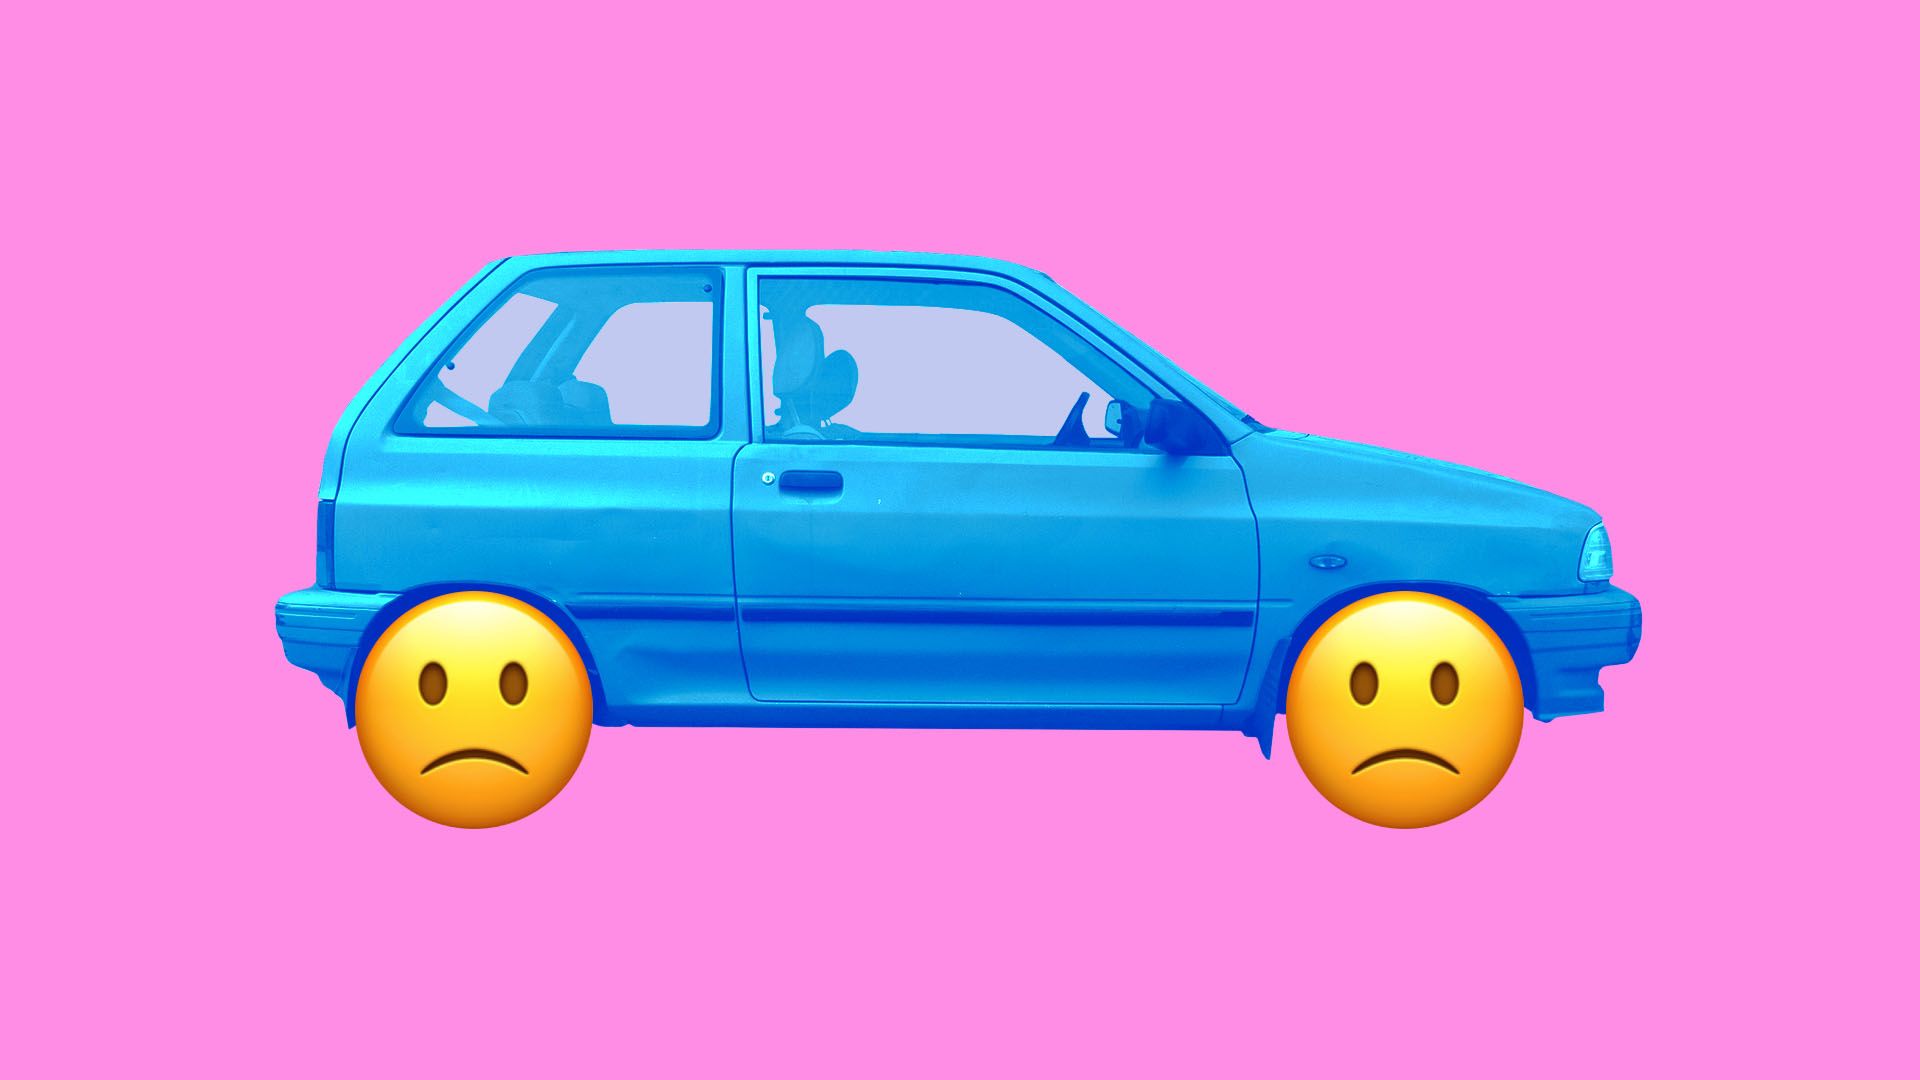 Illustration of a car with sad emojis instead of wheels